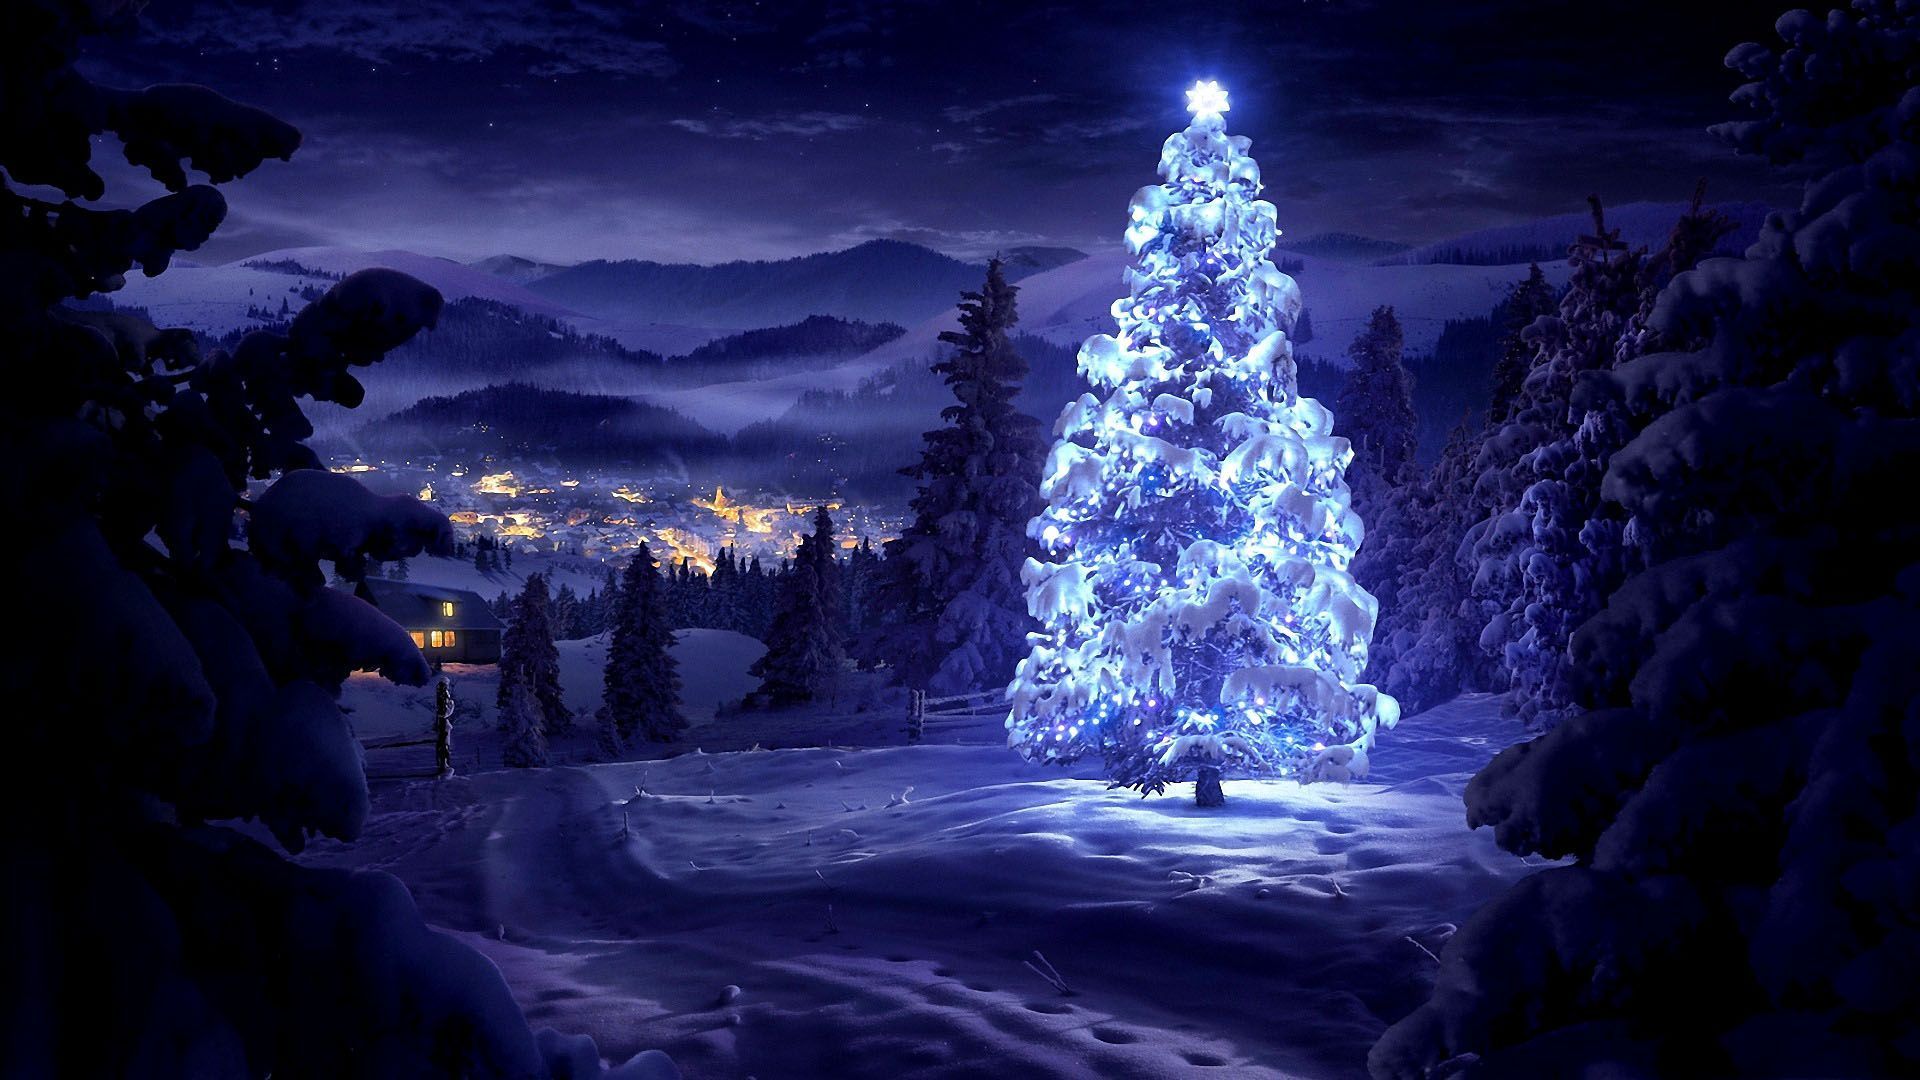 Christmas Tree Wallpaper HD Pictures | One HD Wallpaper Pictures ...